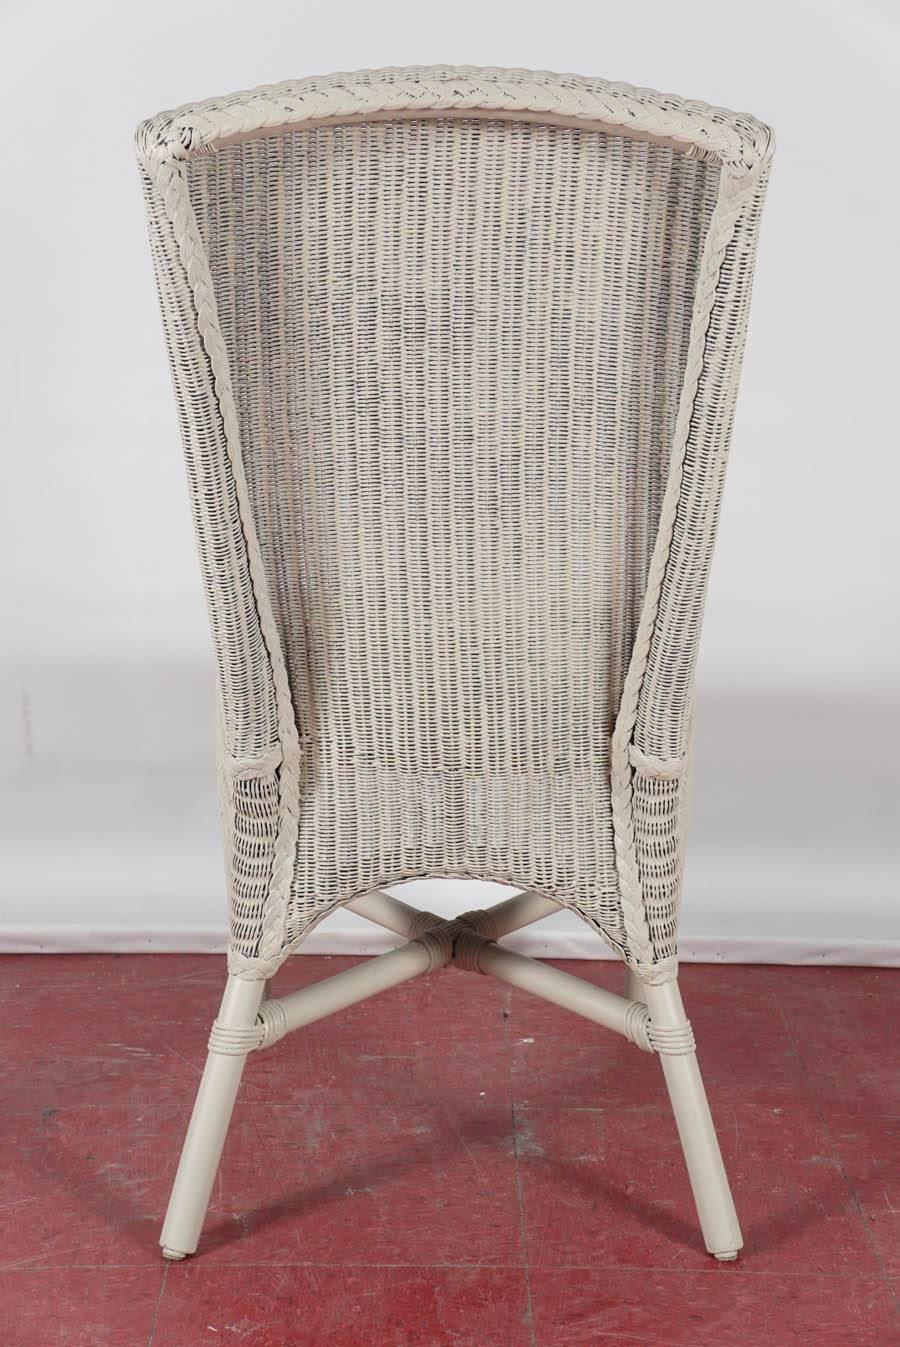 Other Six Vintage Lloyd Loom Wicker Dining Chairs